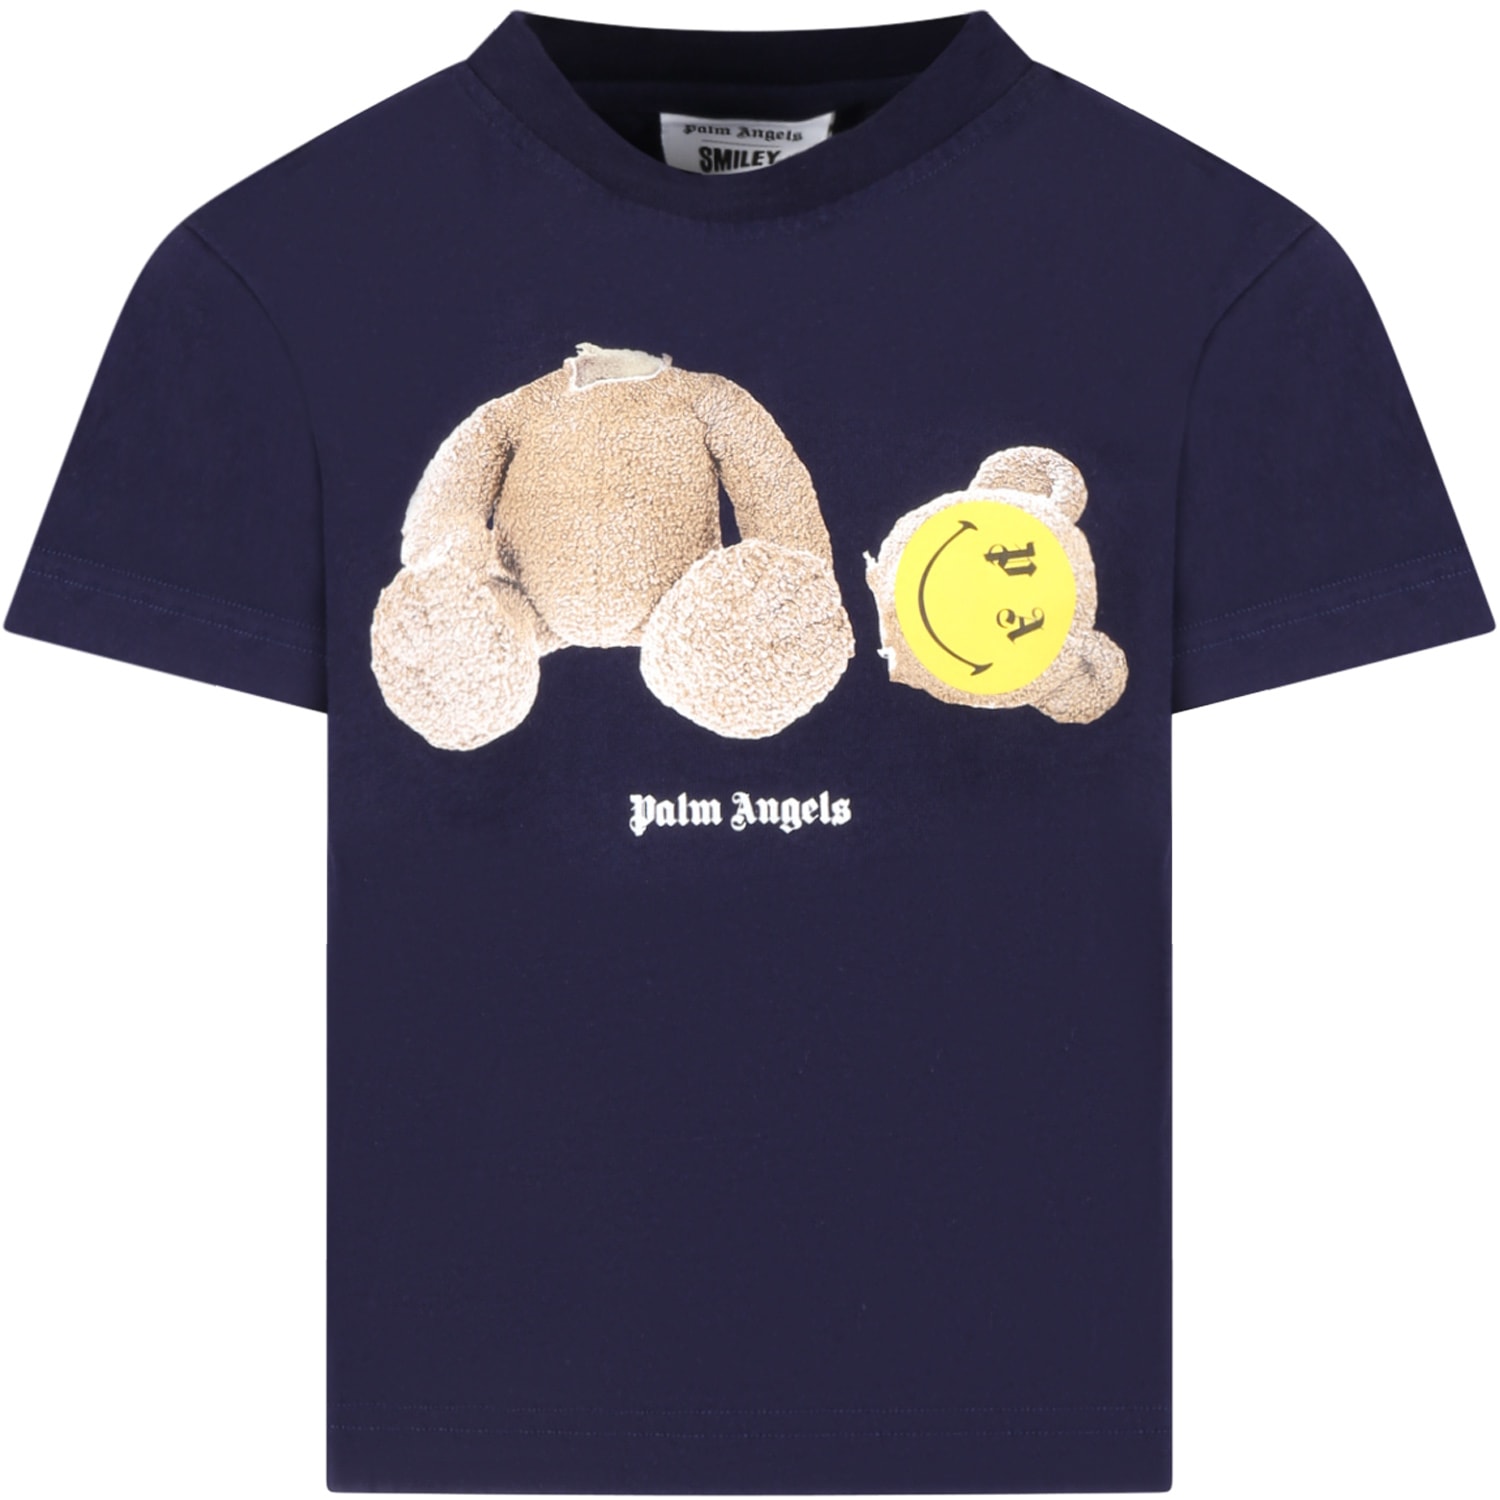 Palm Angels Blue T-shirt For Kids With Smiley